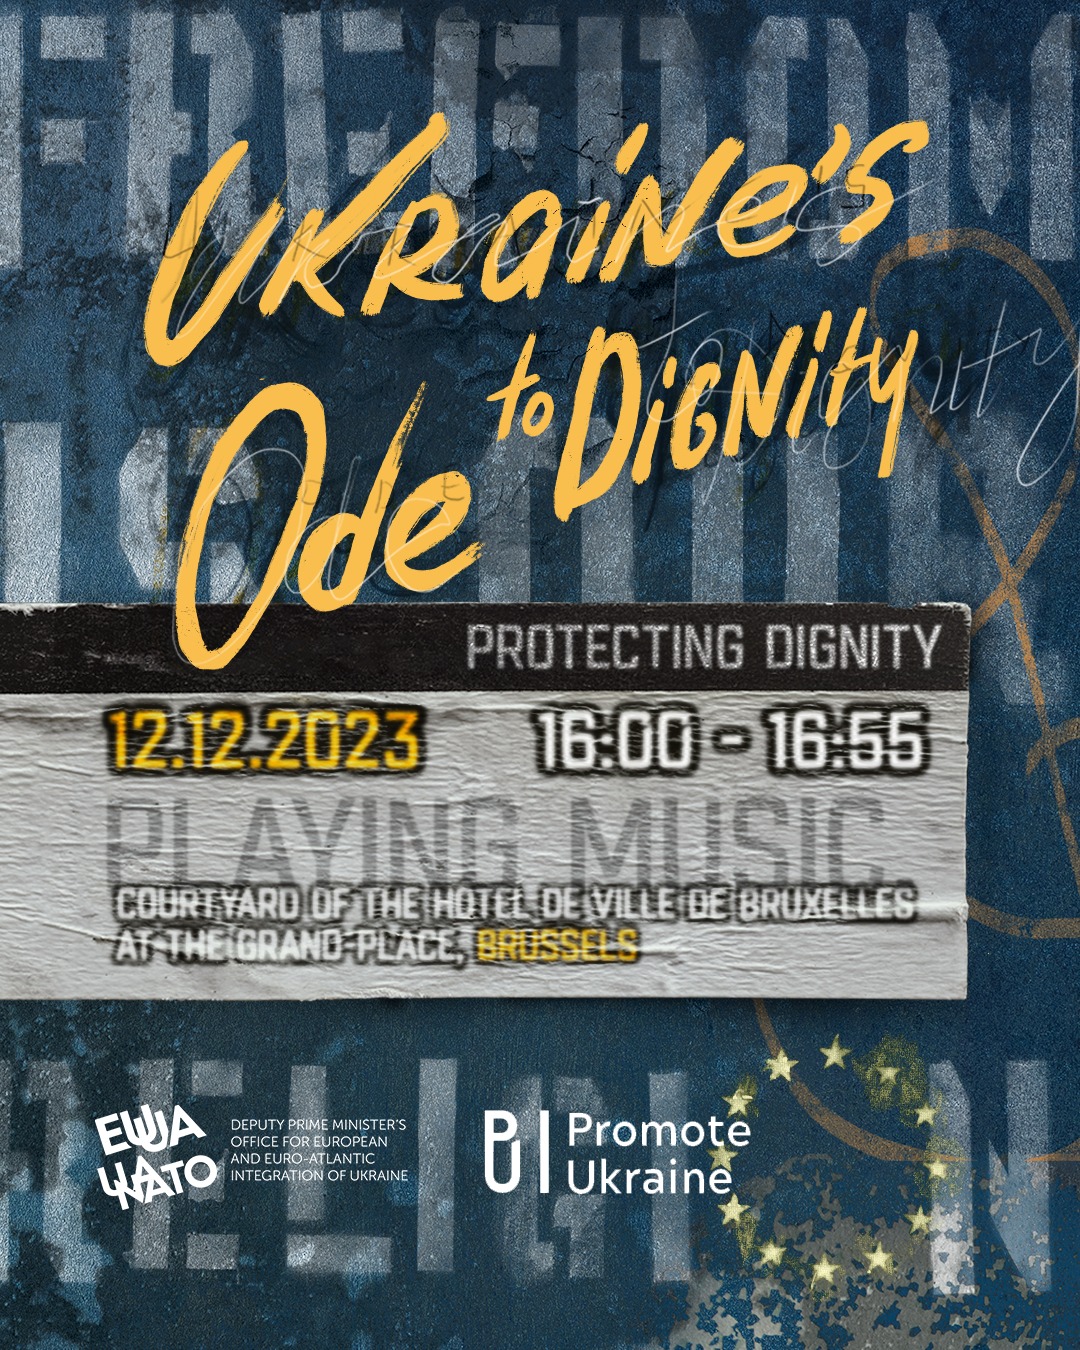 To the 10th anniversary of the Revolution of Dignity, we invite you to the musical performance "Ukraine's Ode to Dignity"